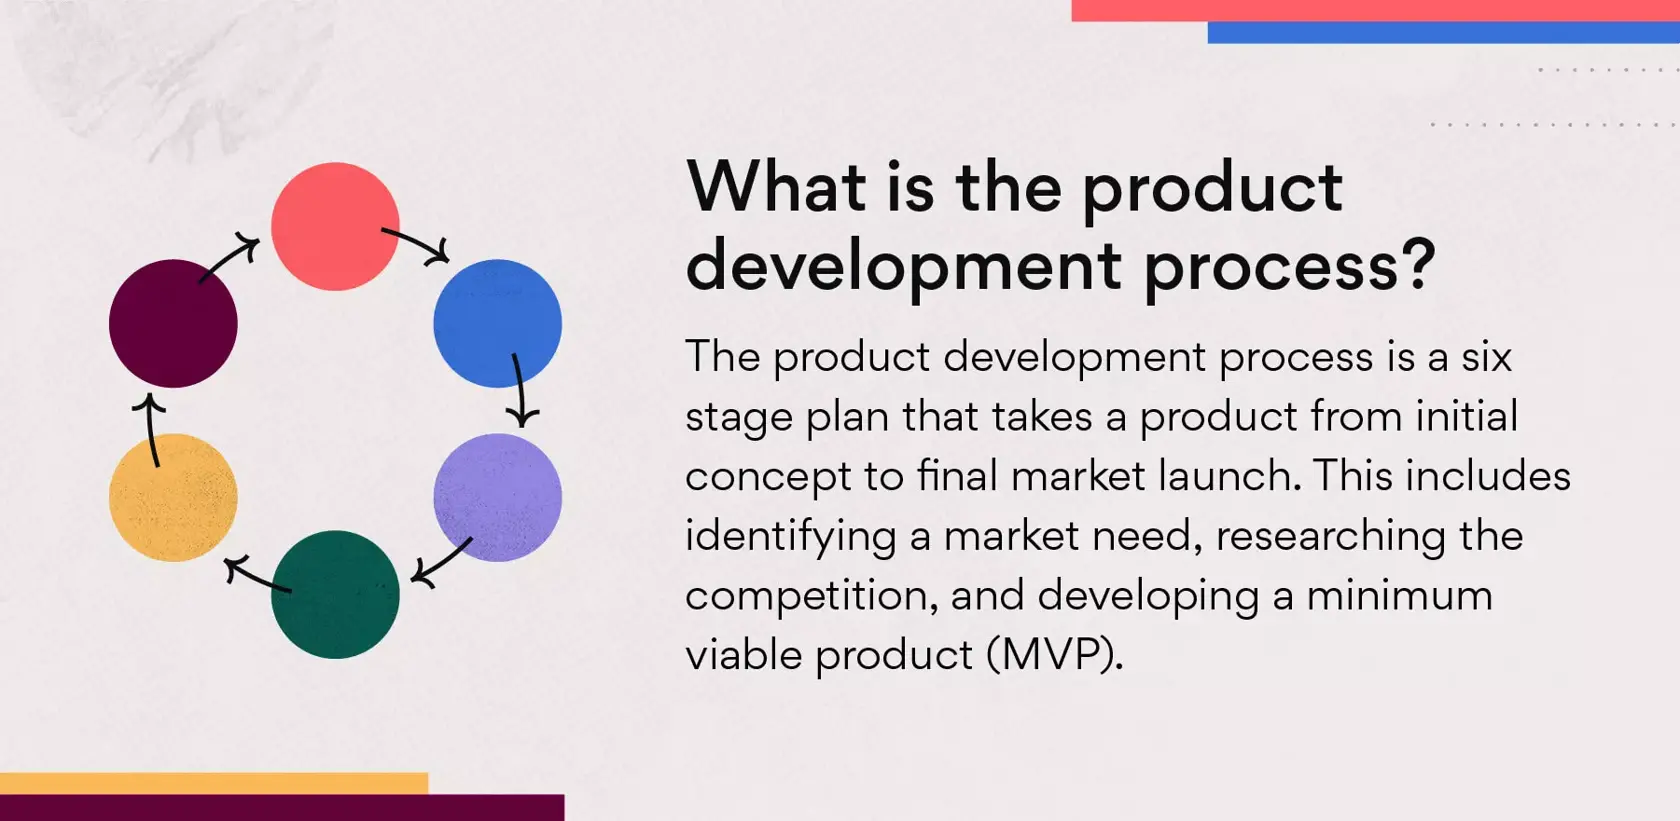 What is the product development process?